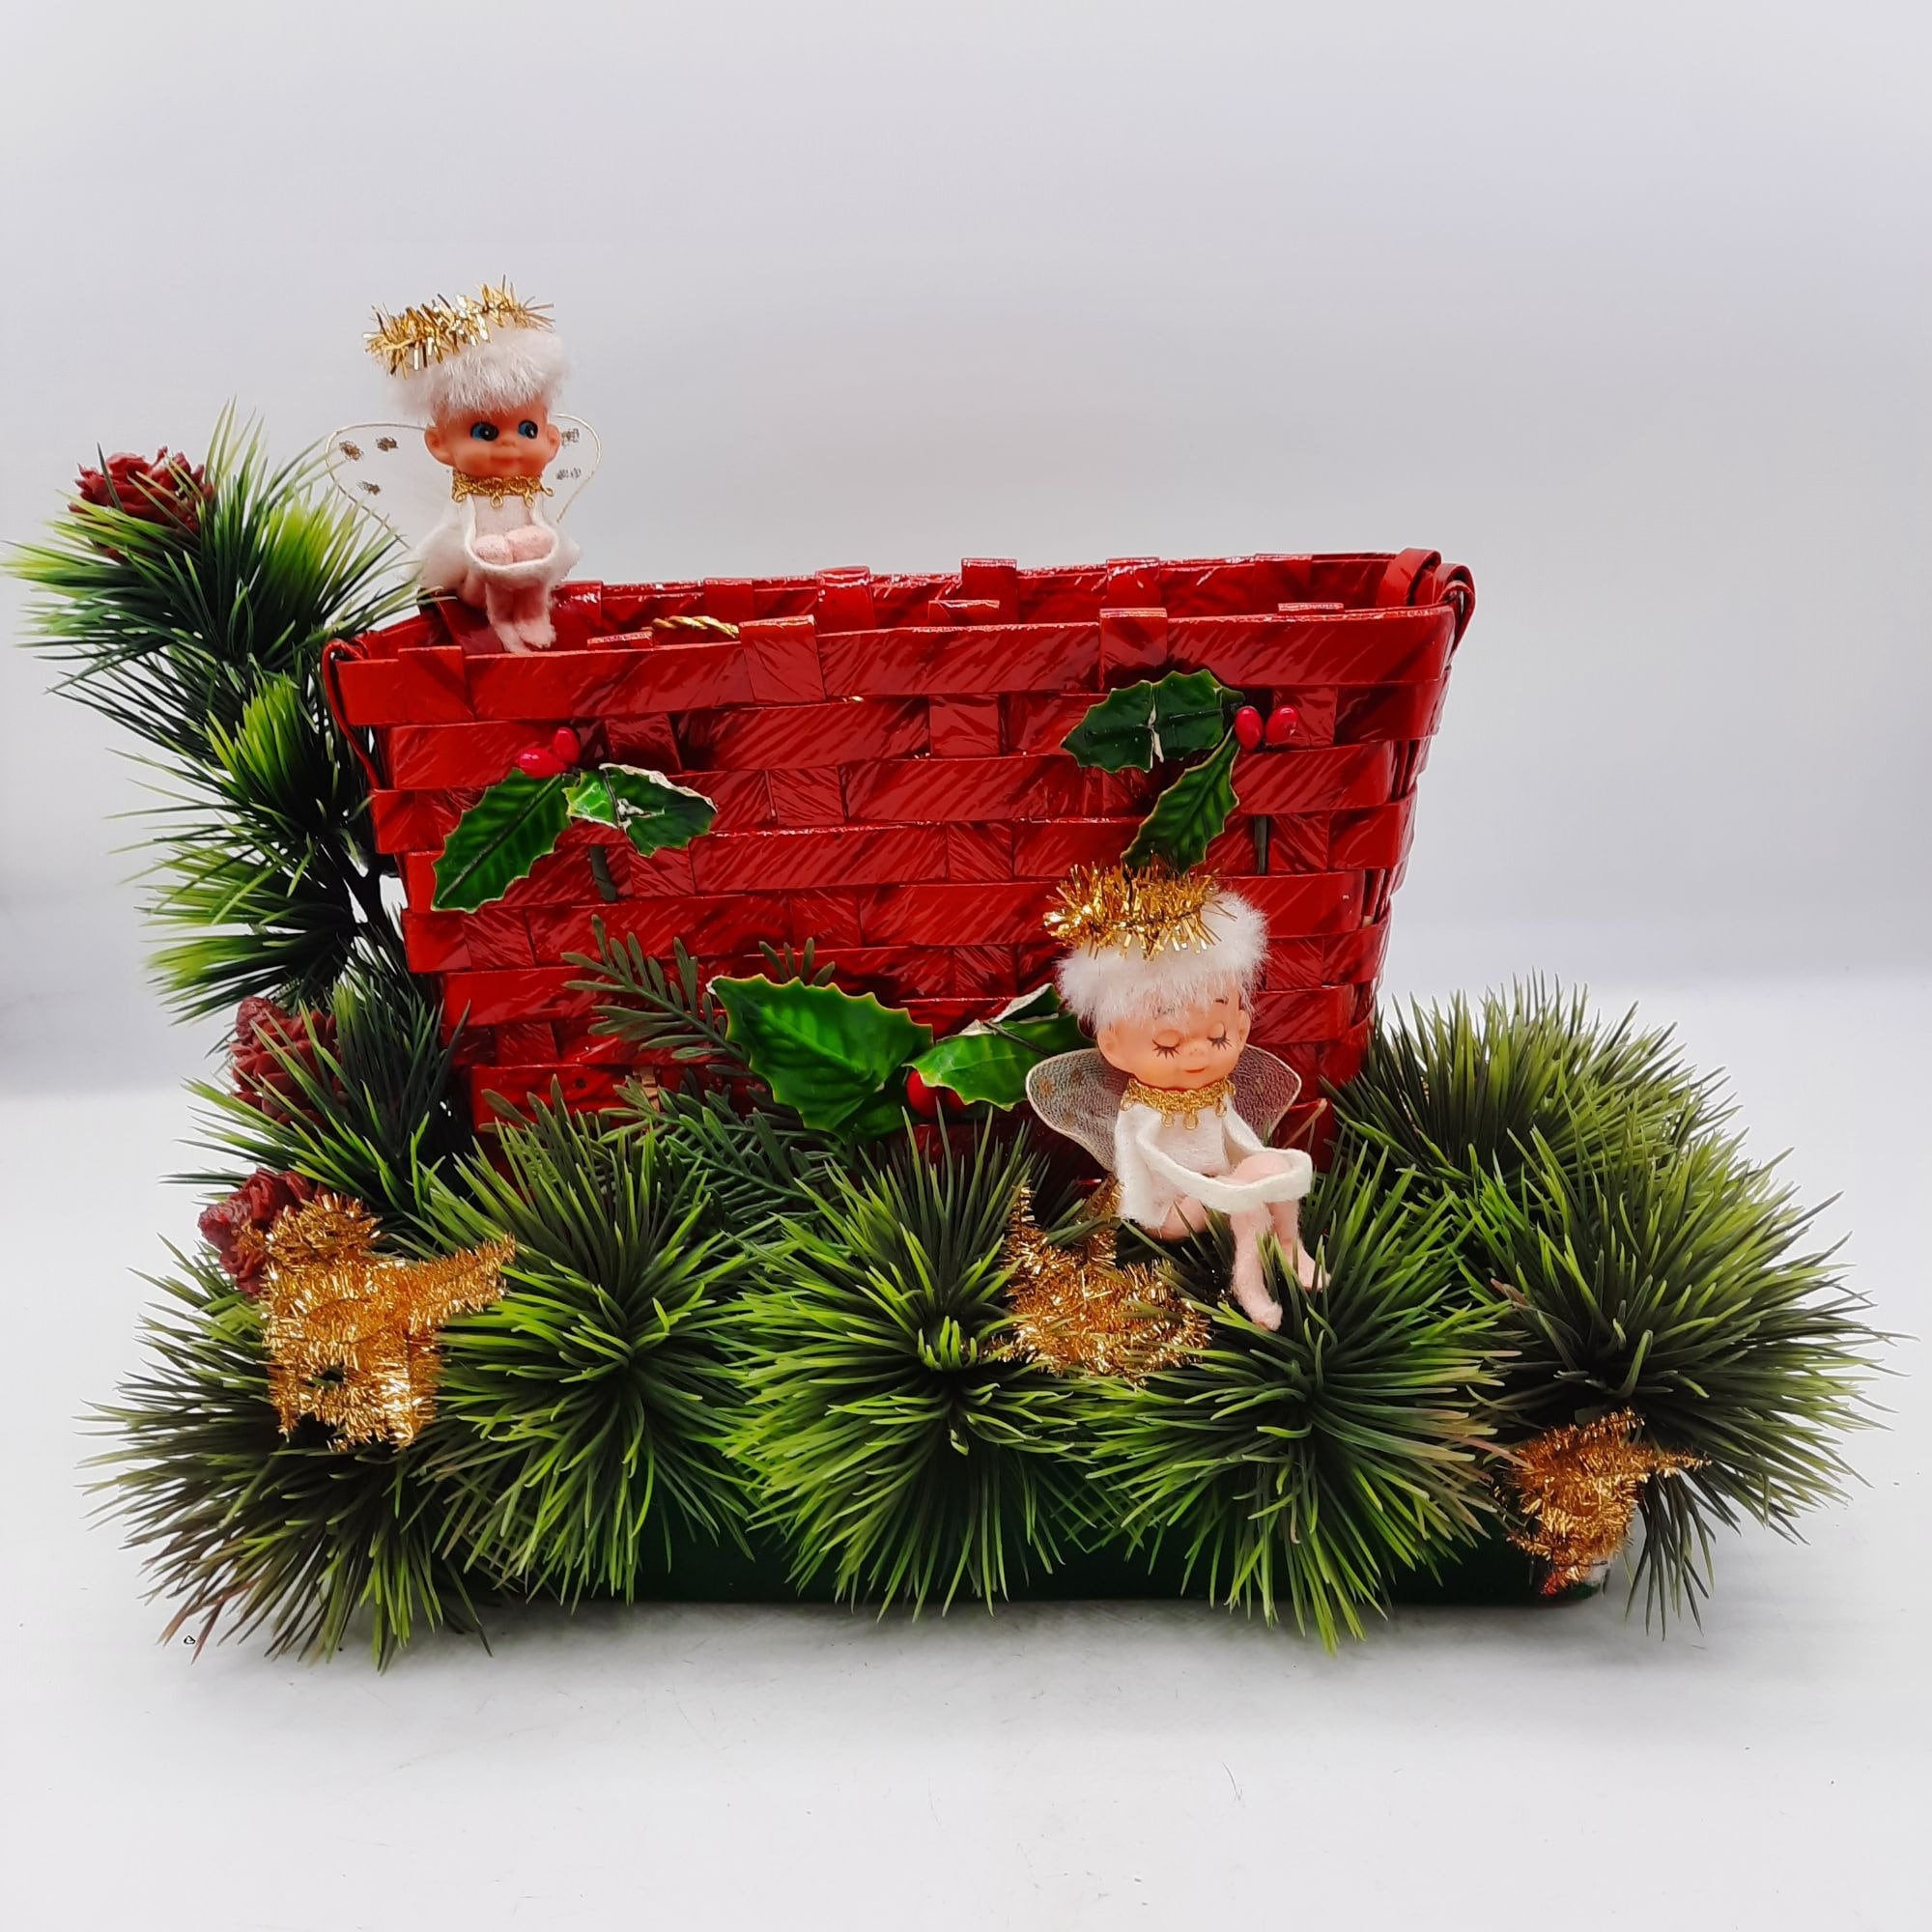 Vintage 1970s Plastic Christmas Greenery and Decorations Perfect for  Creating Vintage Christmas Arrangements Includes a Wreath, Picks 